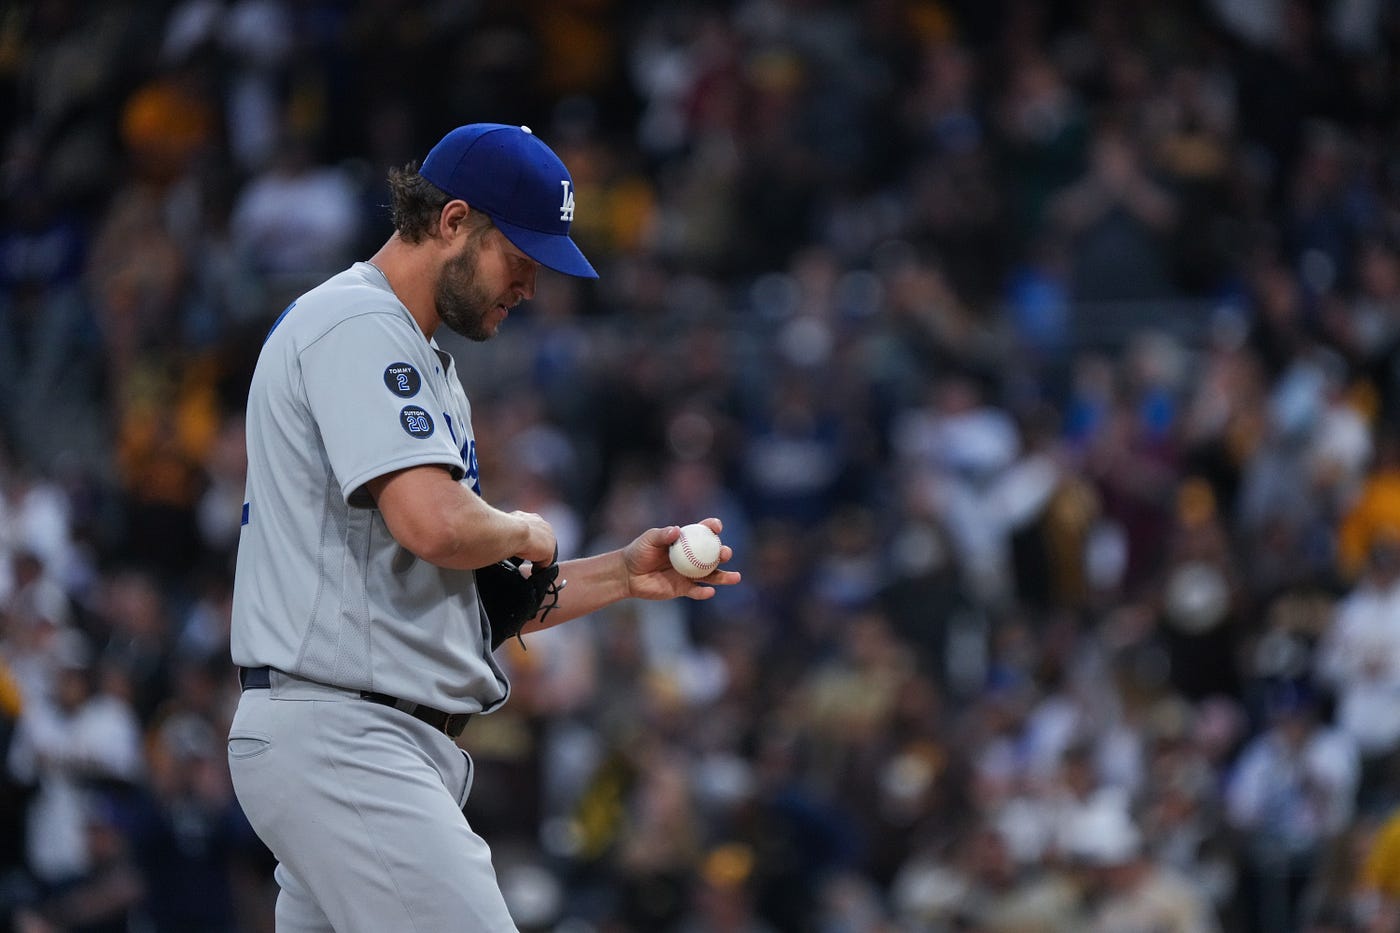 Clayton Kershaw leaning towards returning in 2023, but there's a catch